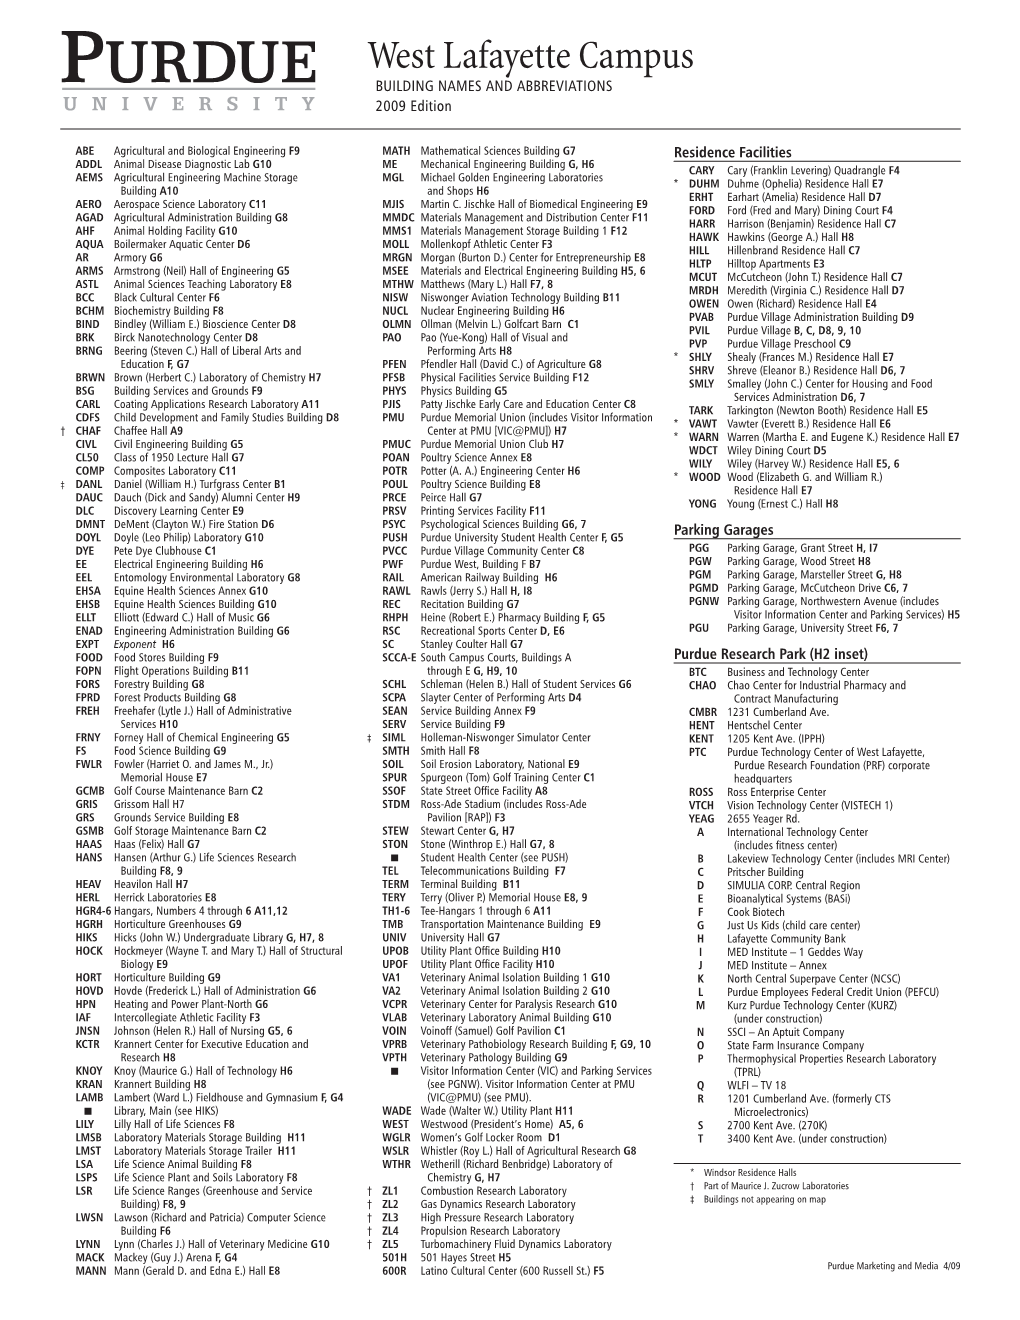 West Lafayette Campus Building Names and Abbreviations 2009 Edition